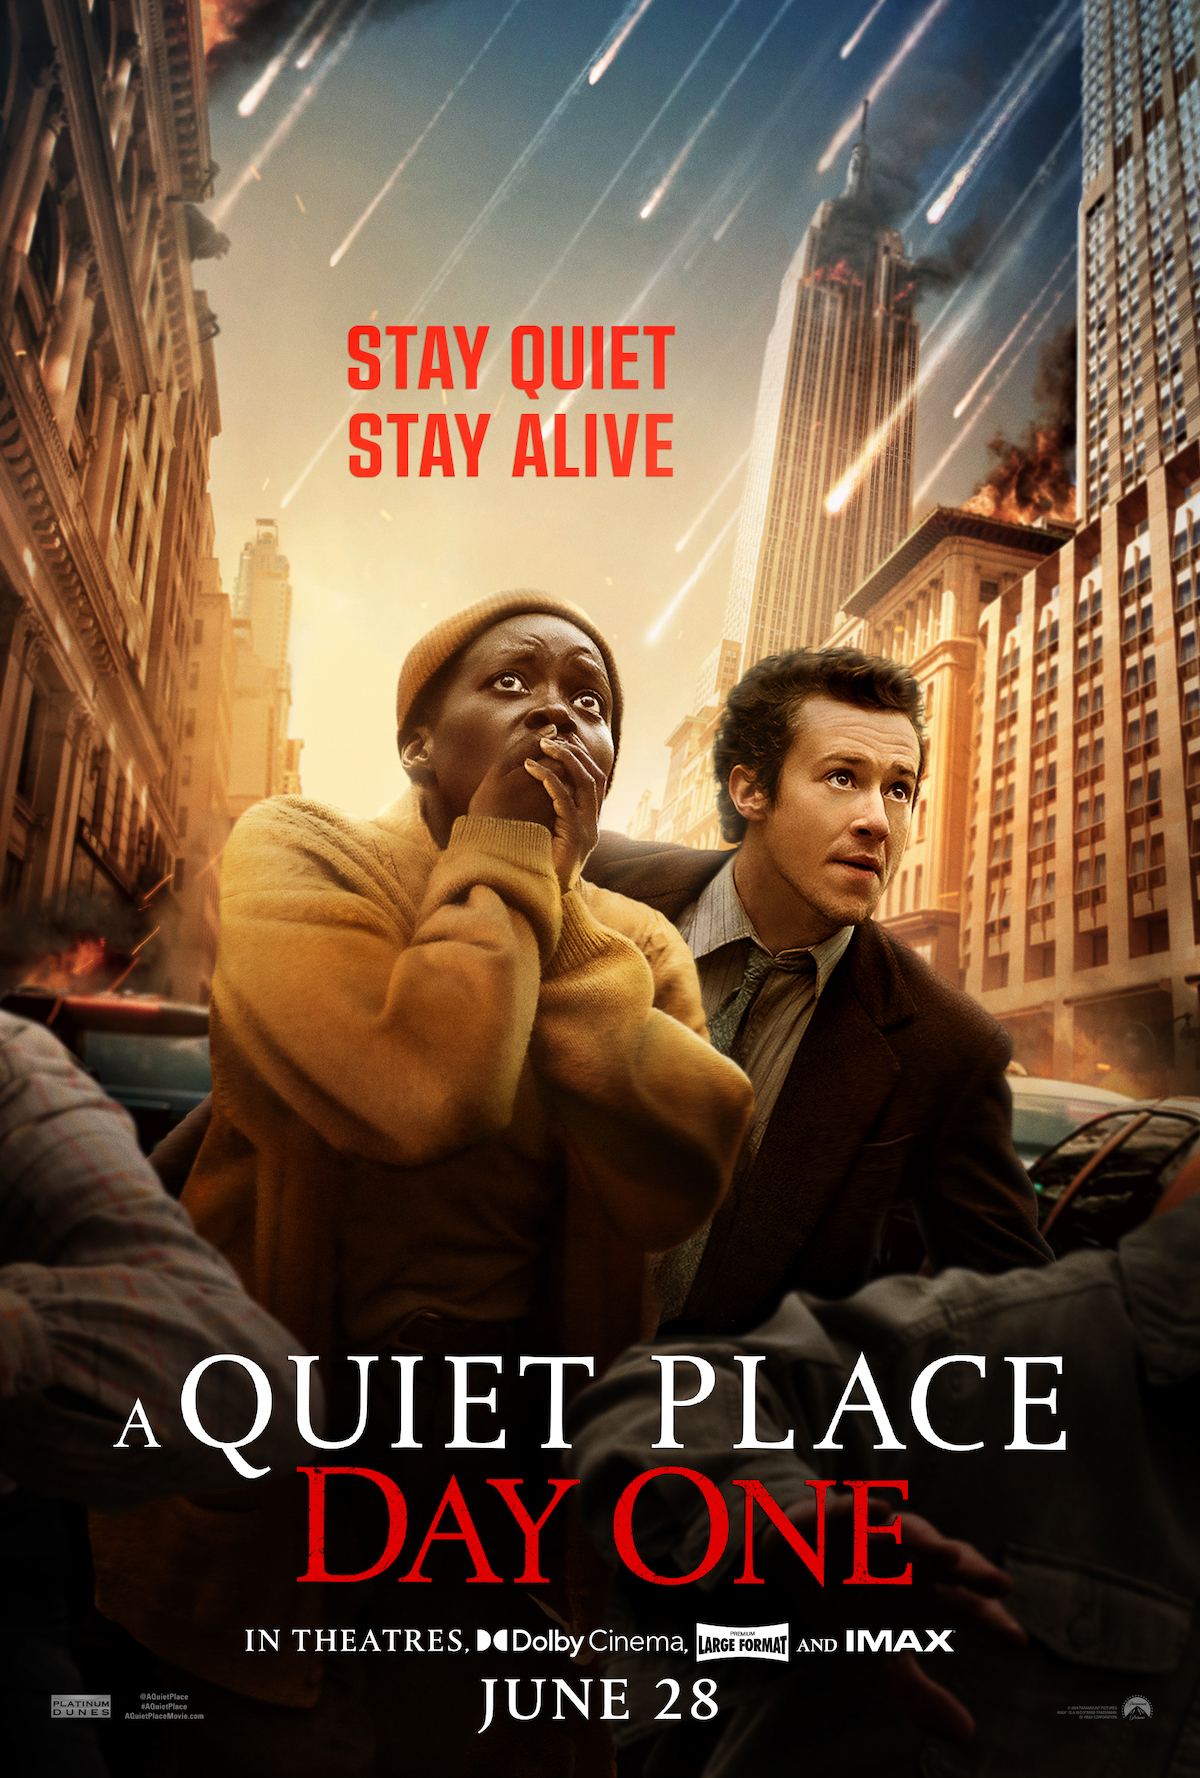 A Quiet Place: Day One assets